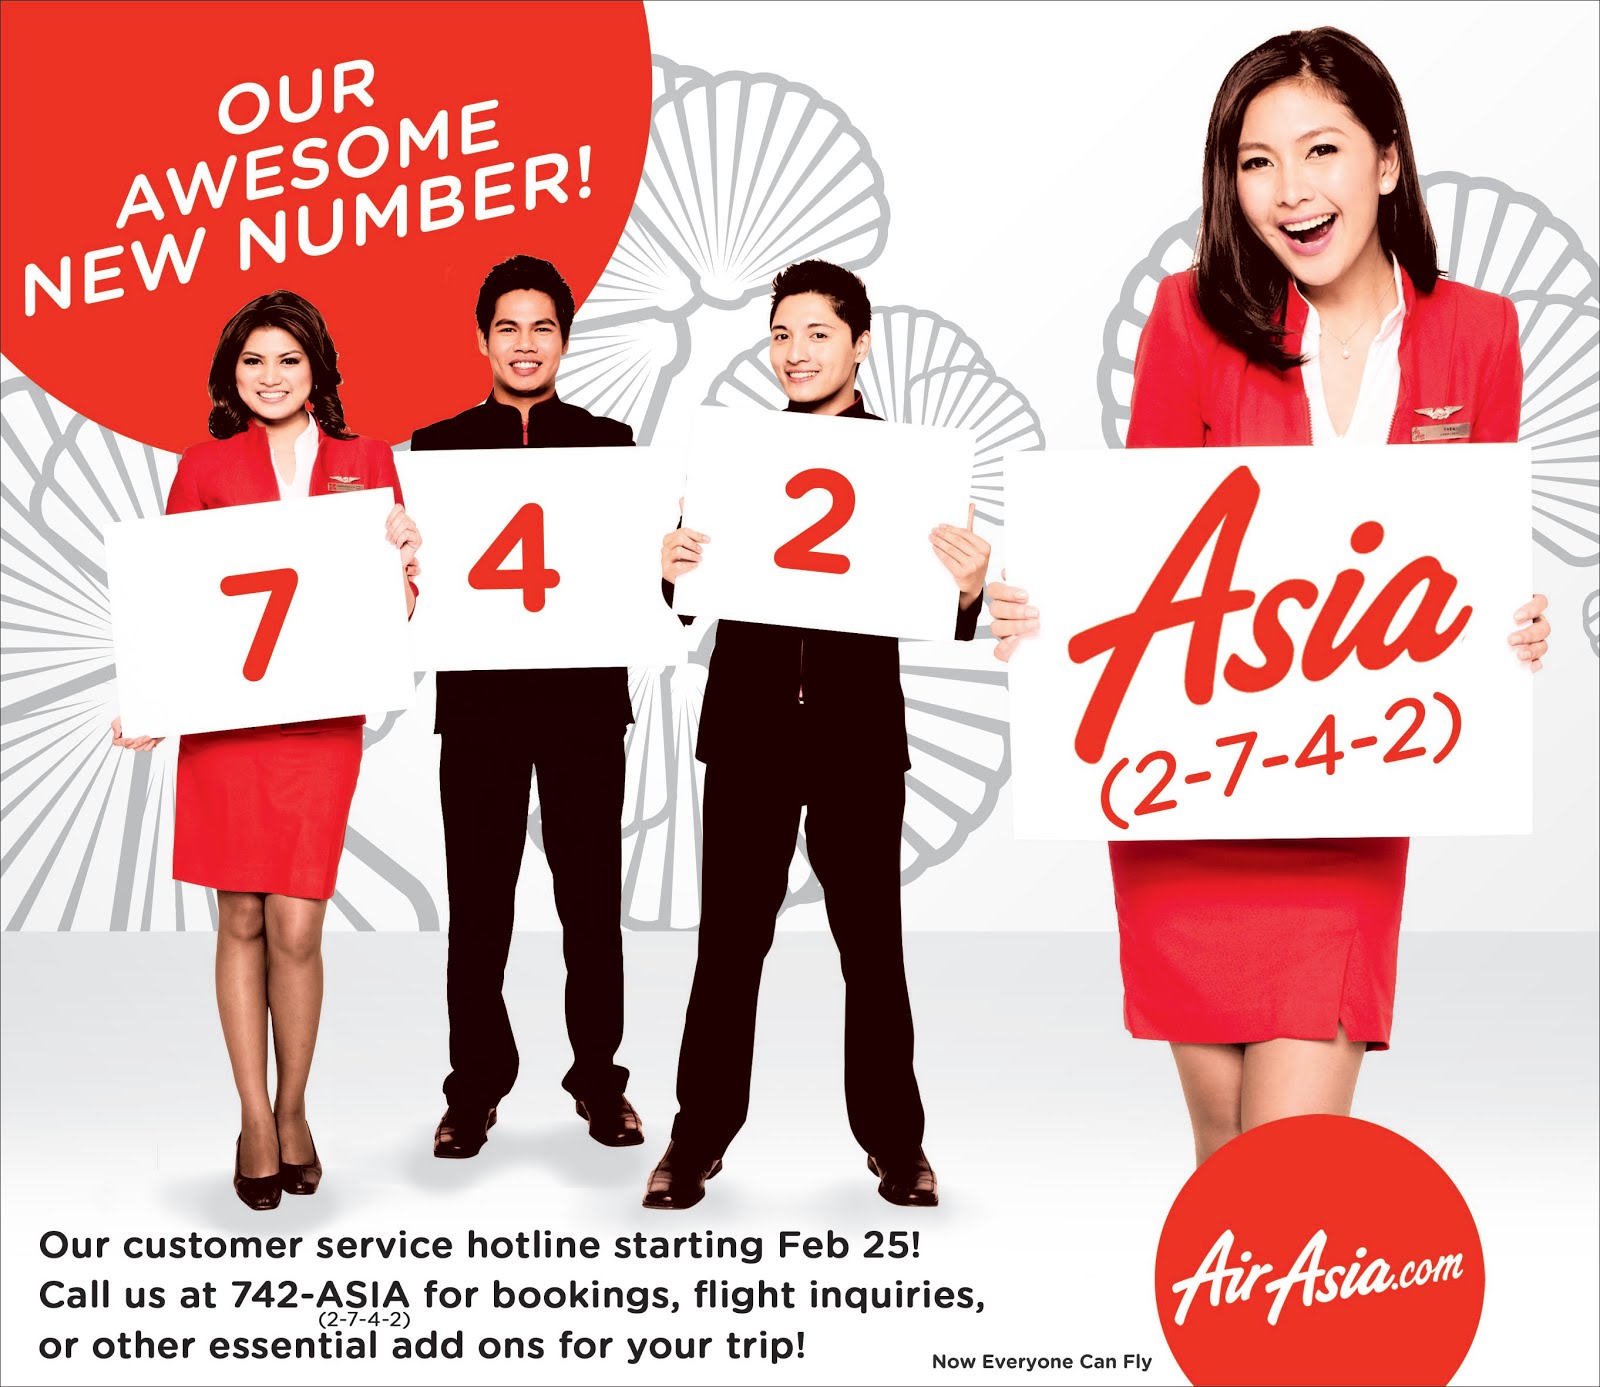 Philippines' AirAsia customer hotline 742-ASIA and now ...